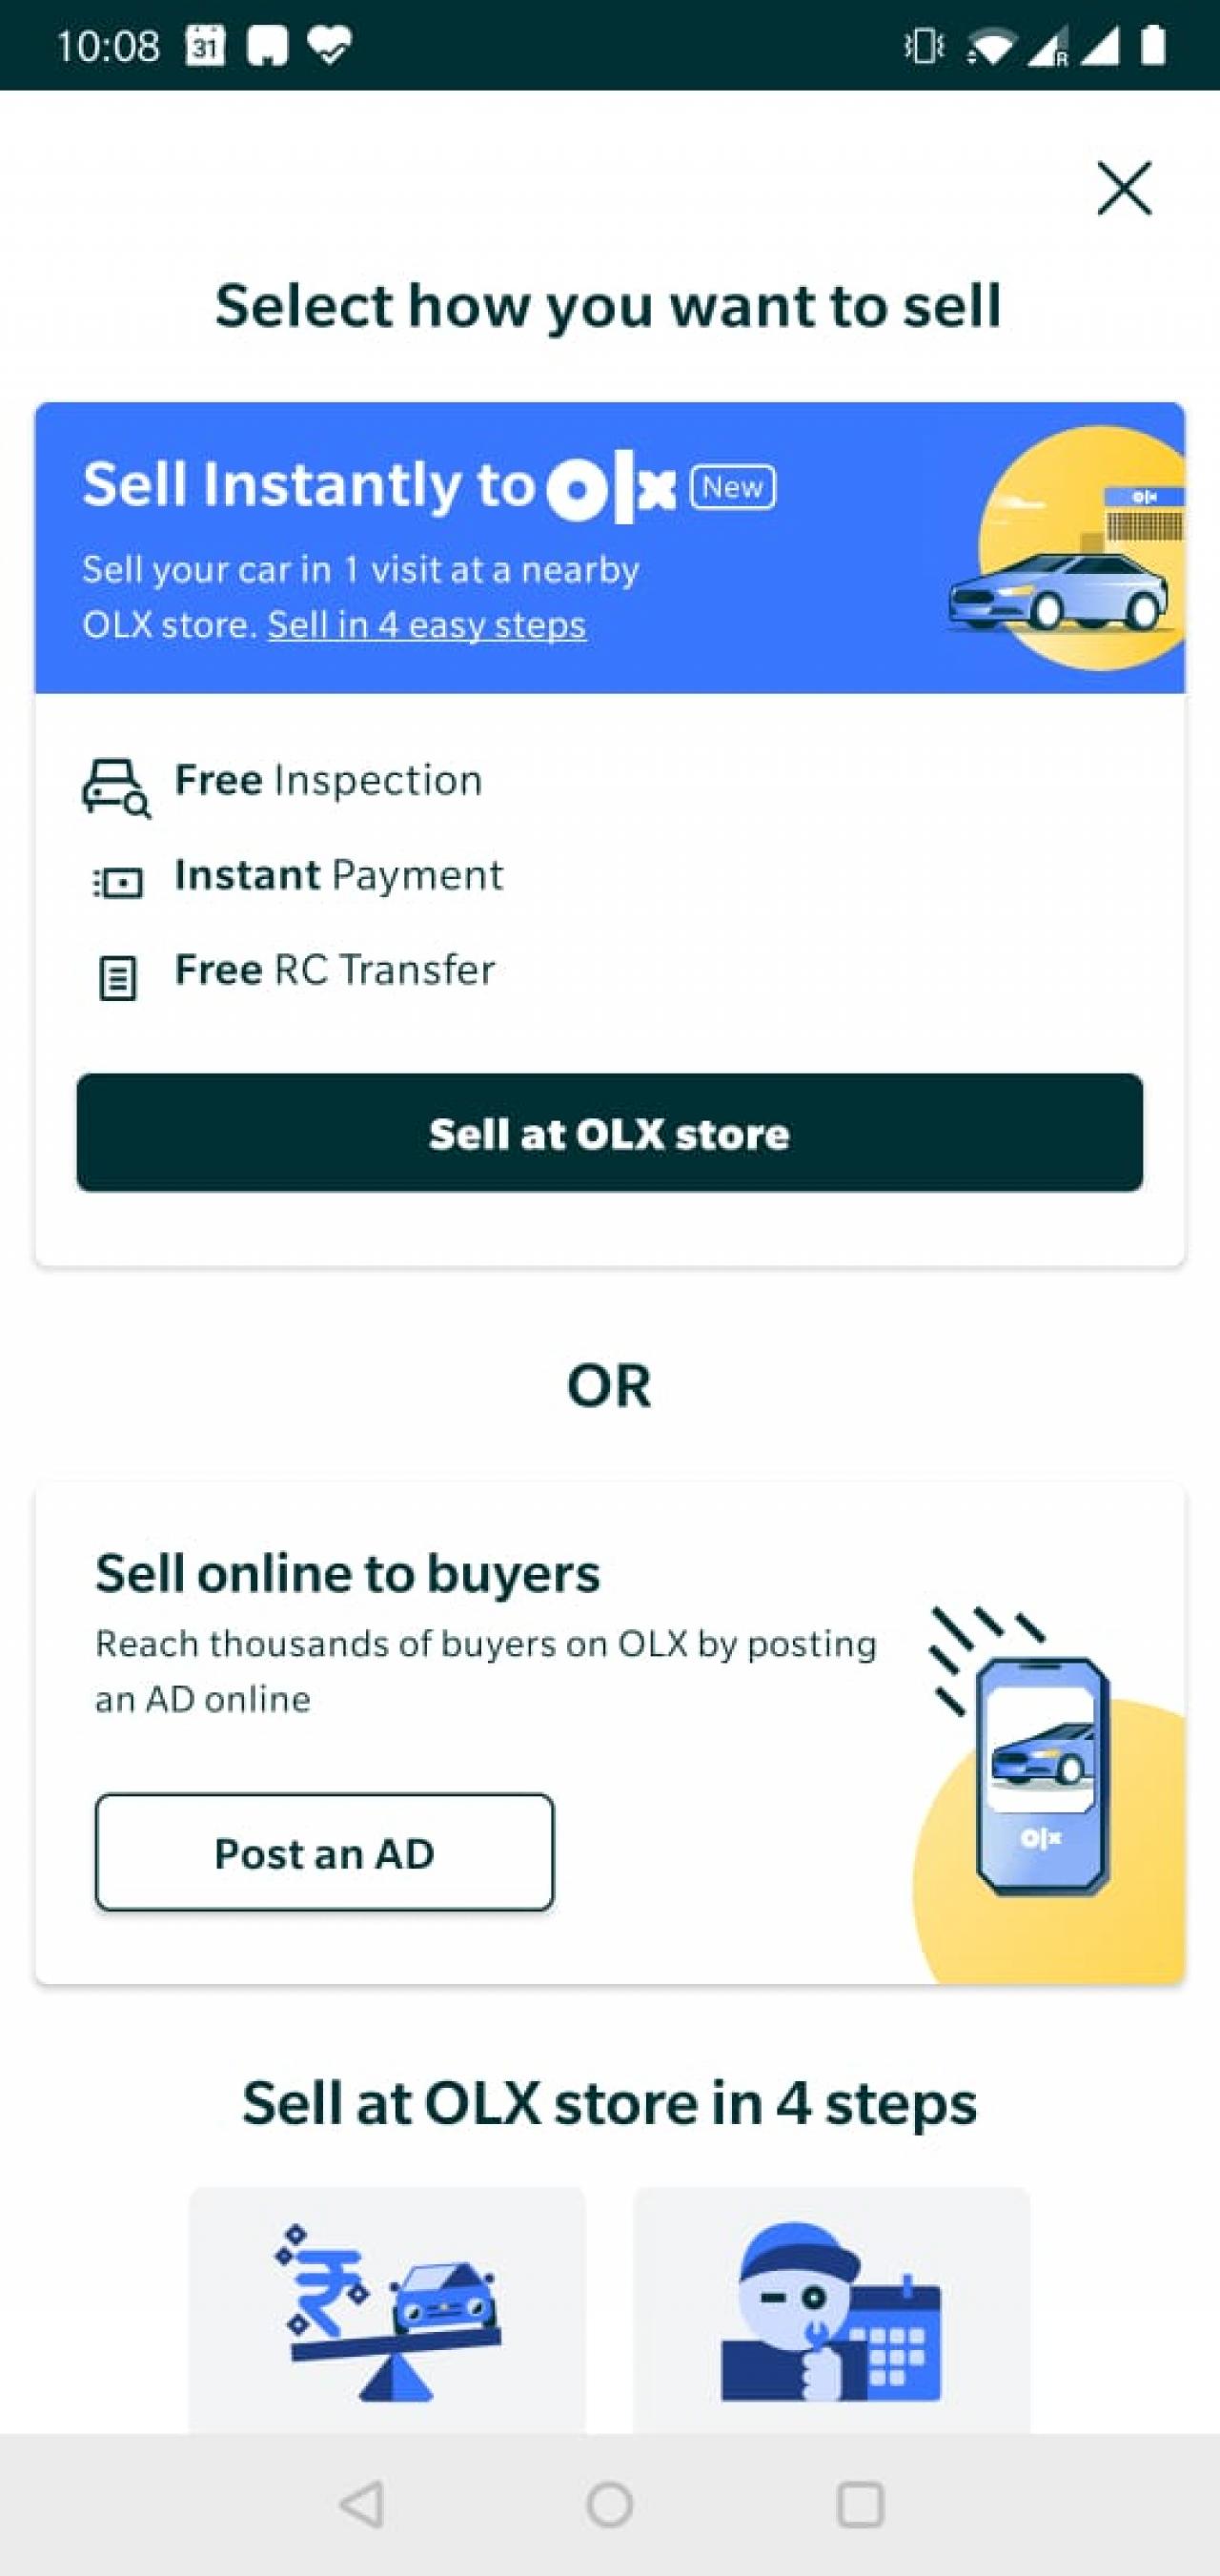 Sell your car to OLX Autos to get instant payment! Visit the nearest OLX  Autos store or book a home inspection. Now sell without any worry…